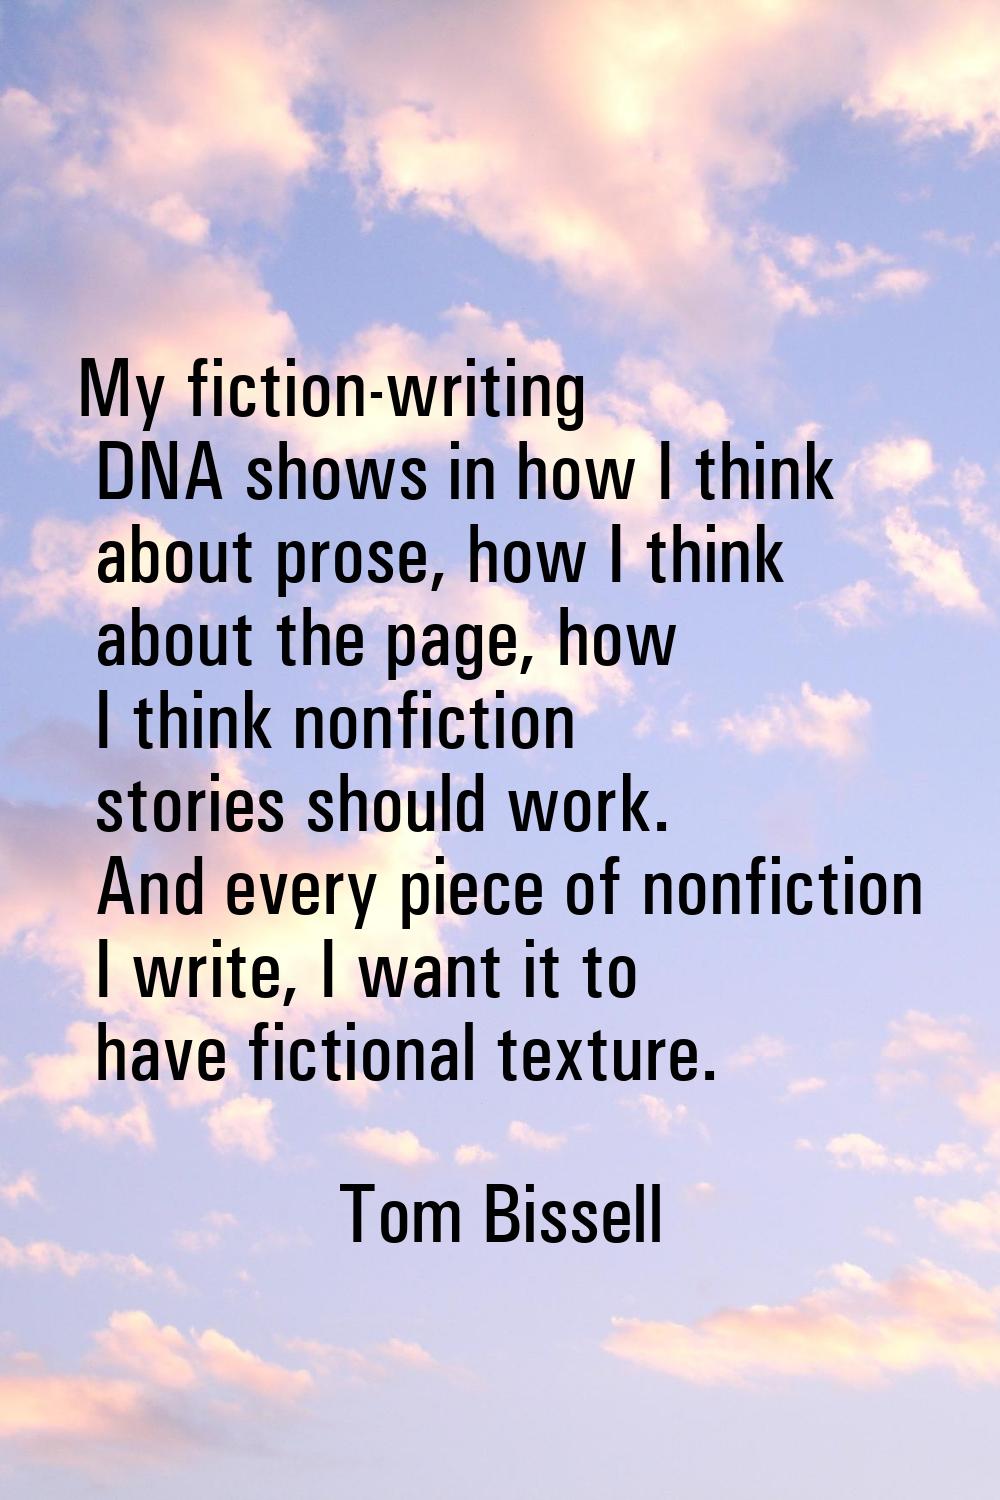 My fiction-writing DNA shows in how I think about prose, how I think about the page, how I think no